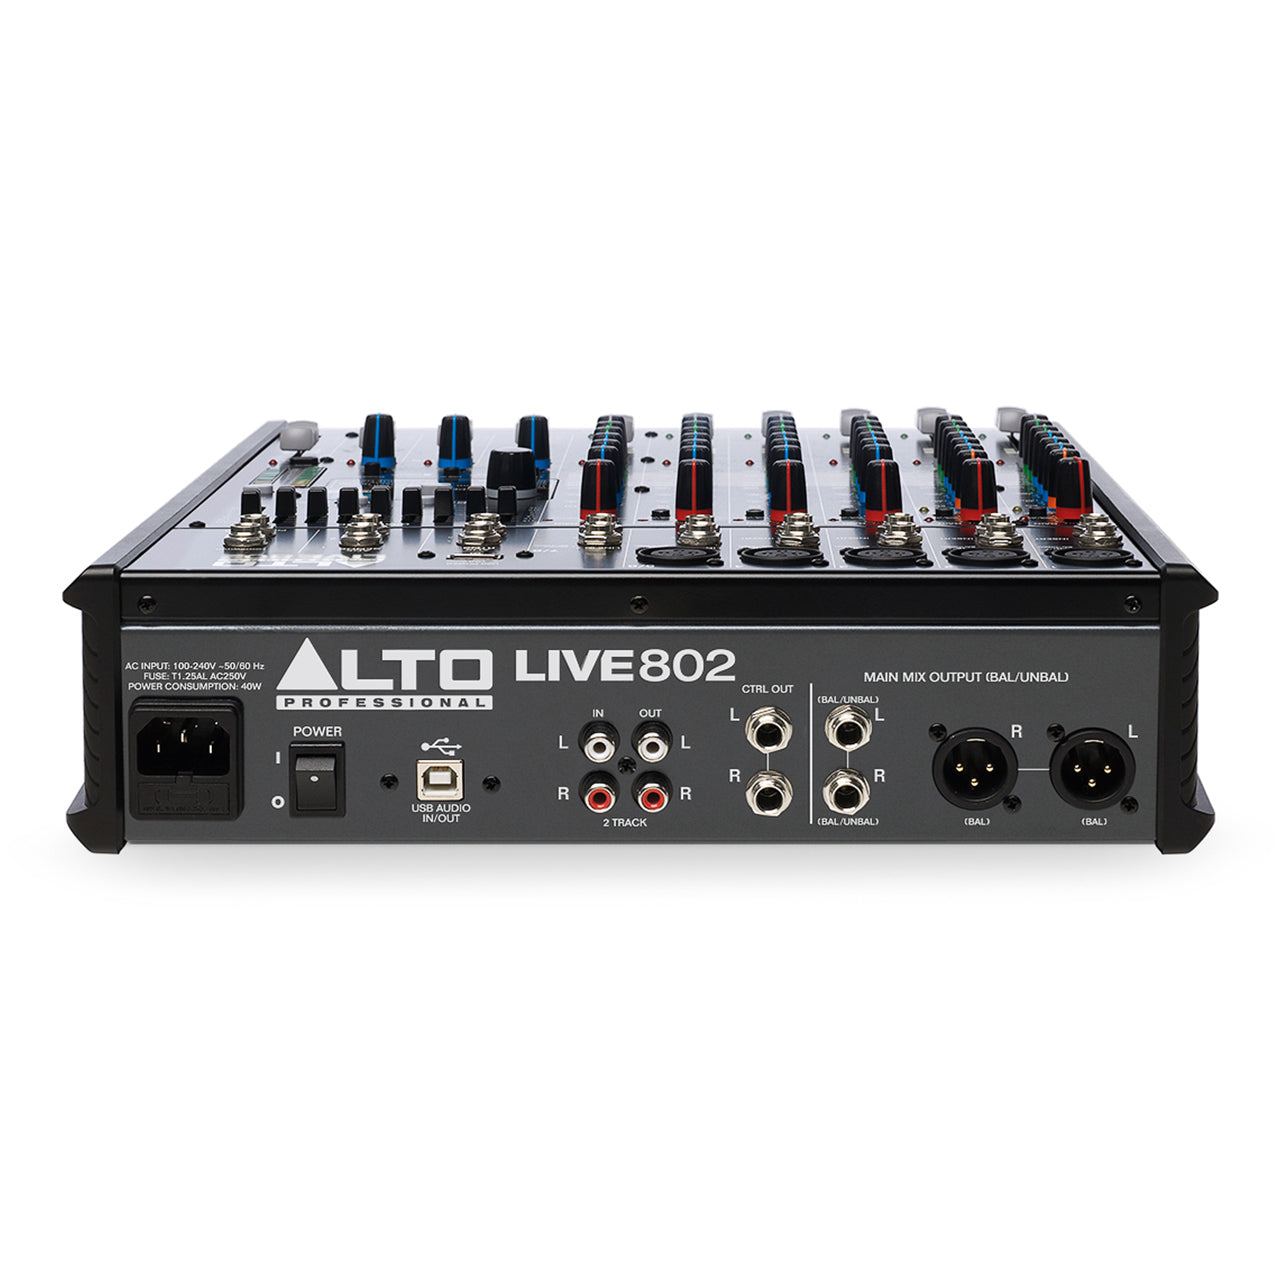 Alto Professional Live 802 8-Channel / 2-Bus Mixer with 5 XLR Inputs, USB Audio Port, 100 DSP Effects for DJ Audio Mixing Equipment